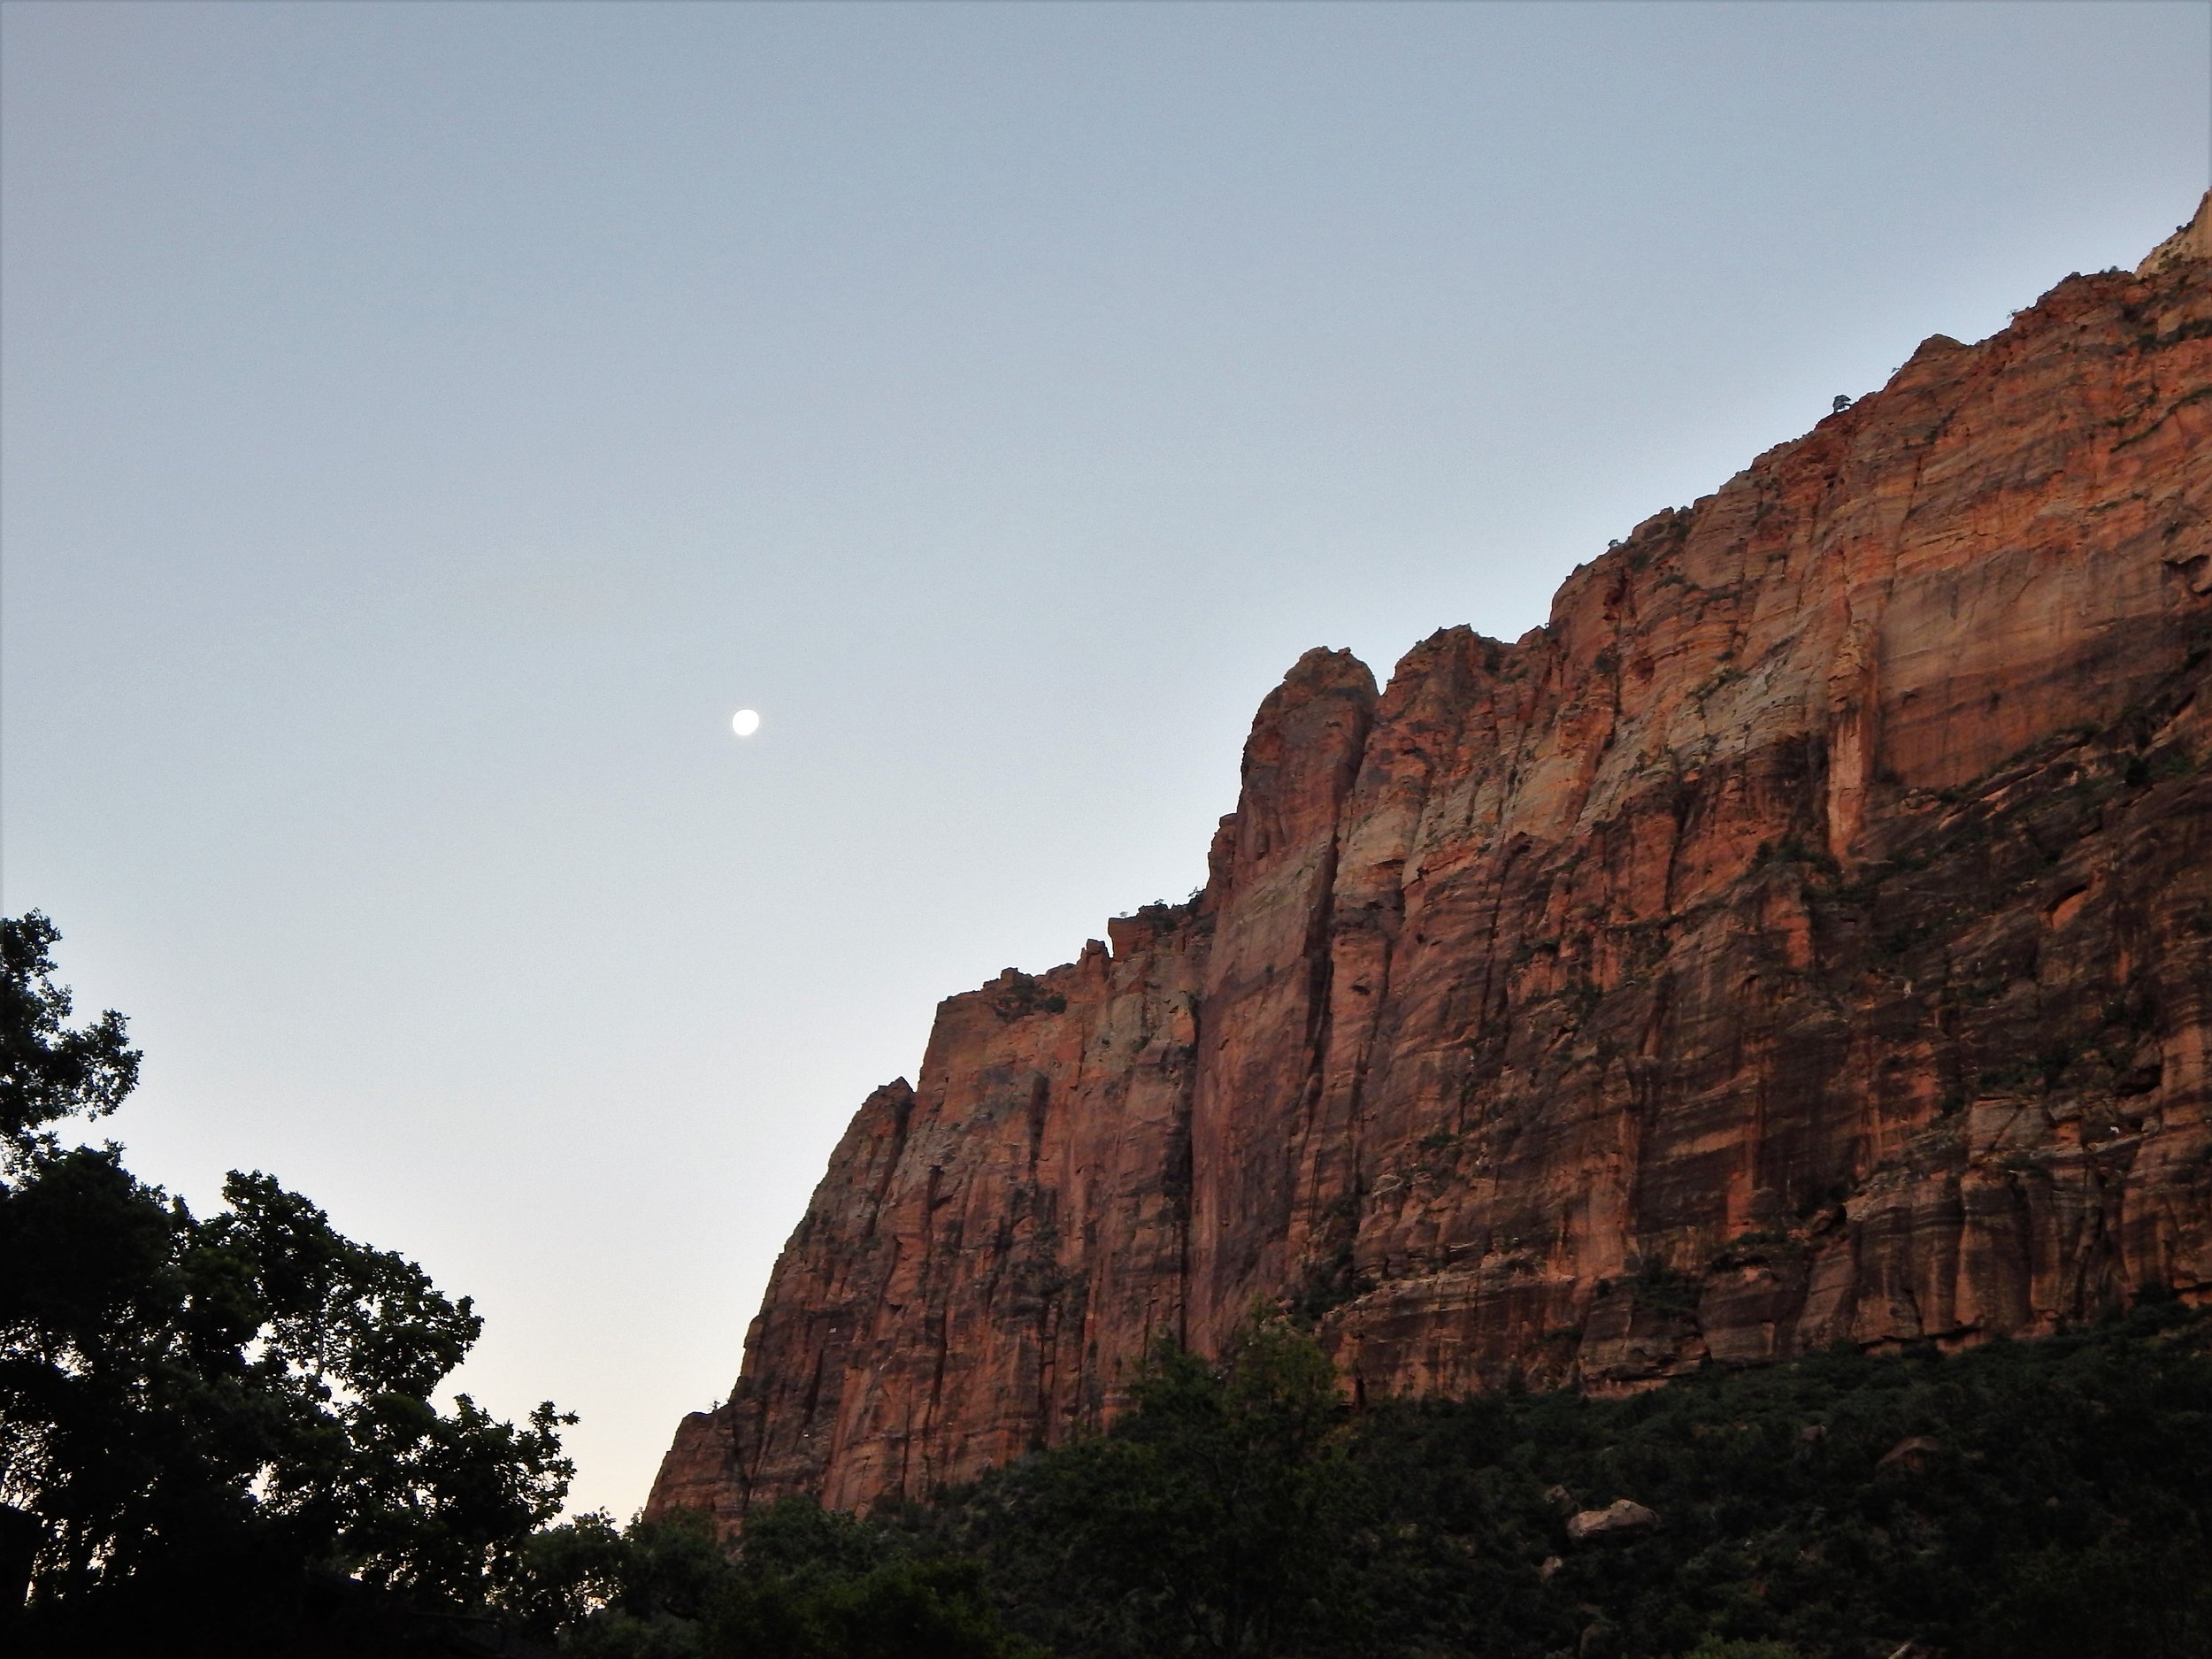 zion-national-park-at-night